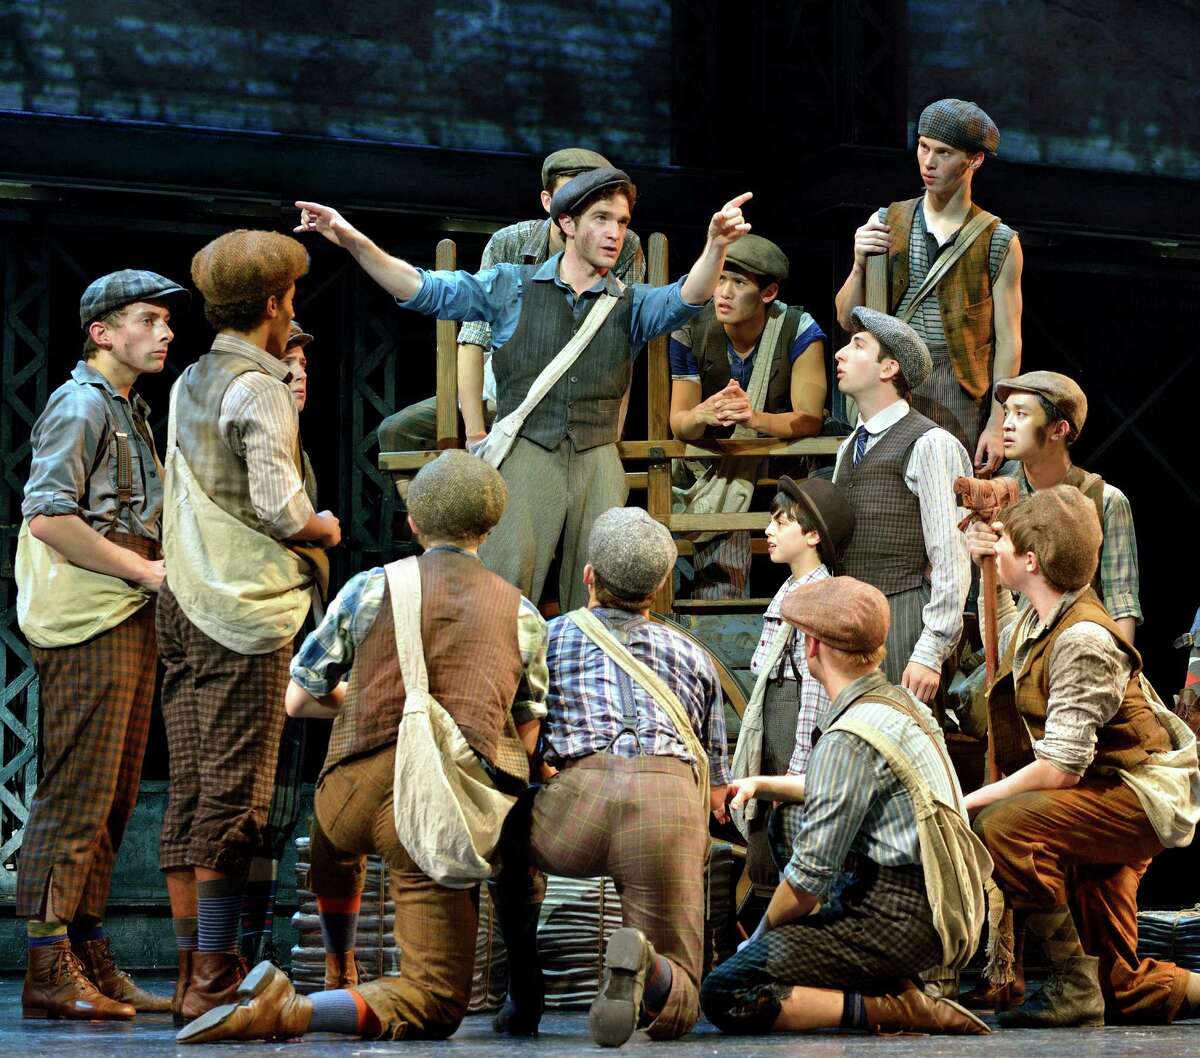 “Newsies’ ” big songs include “Seize the Day” and “The World Will Know.”